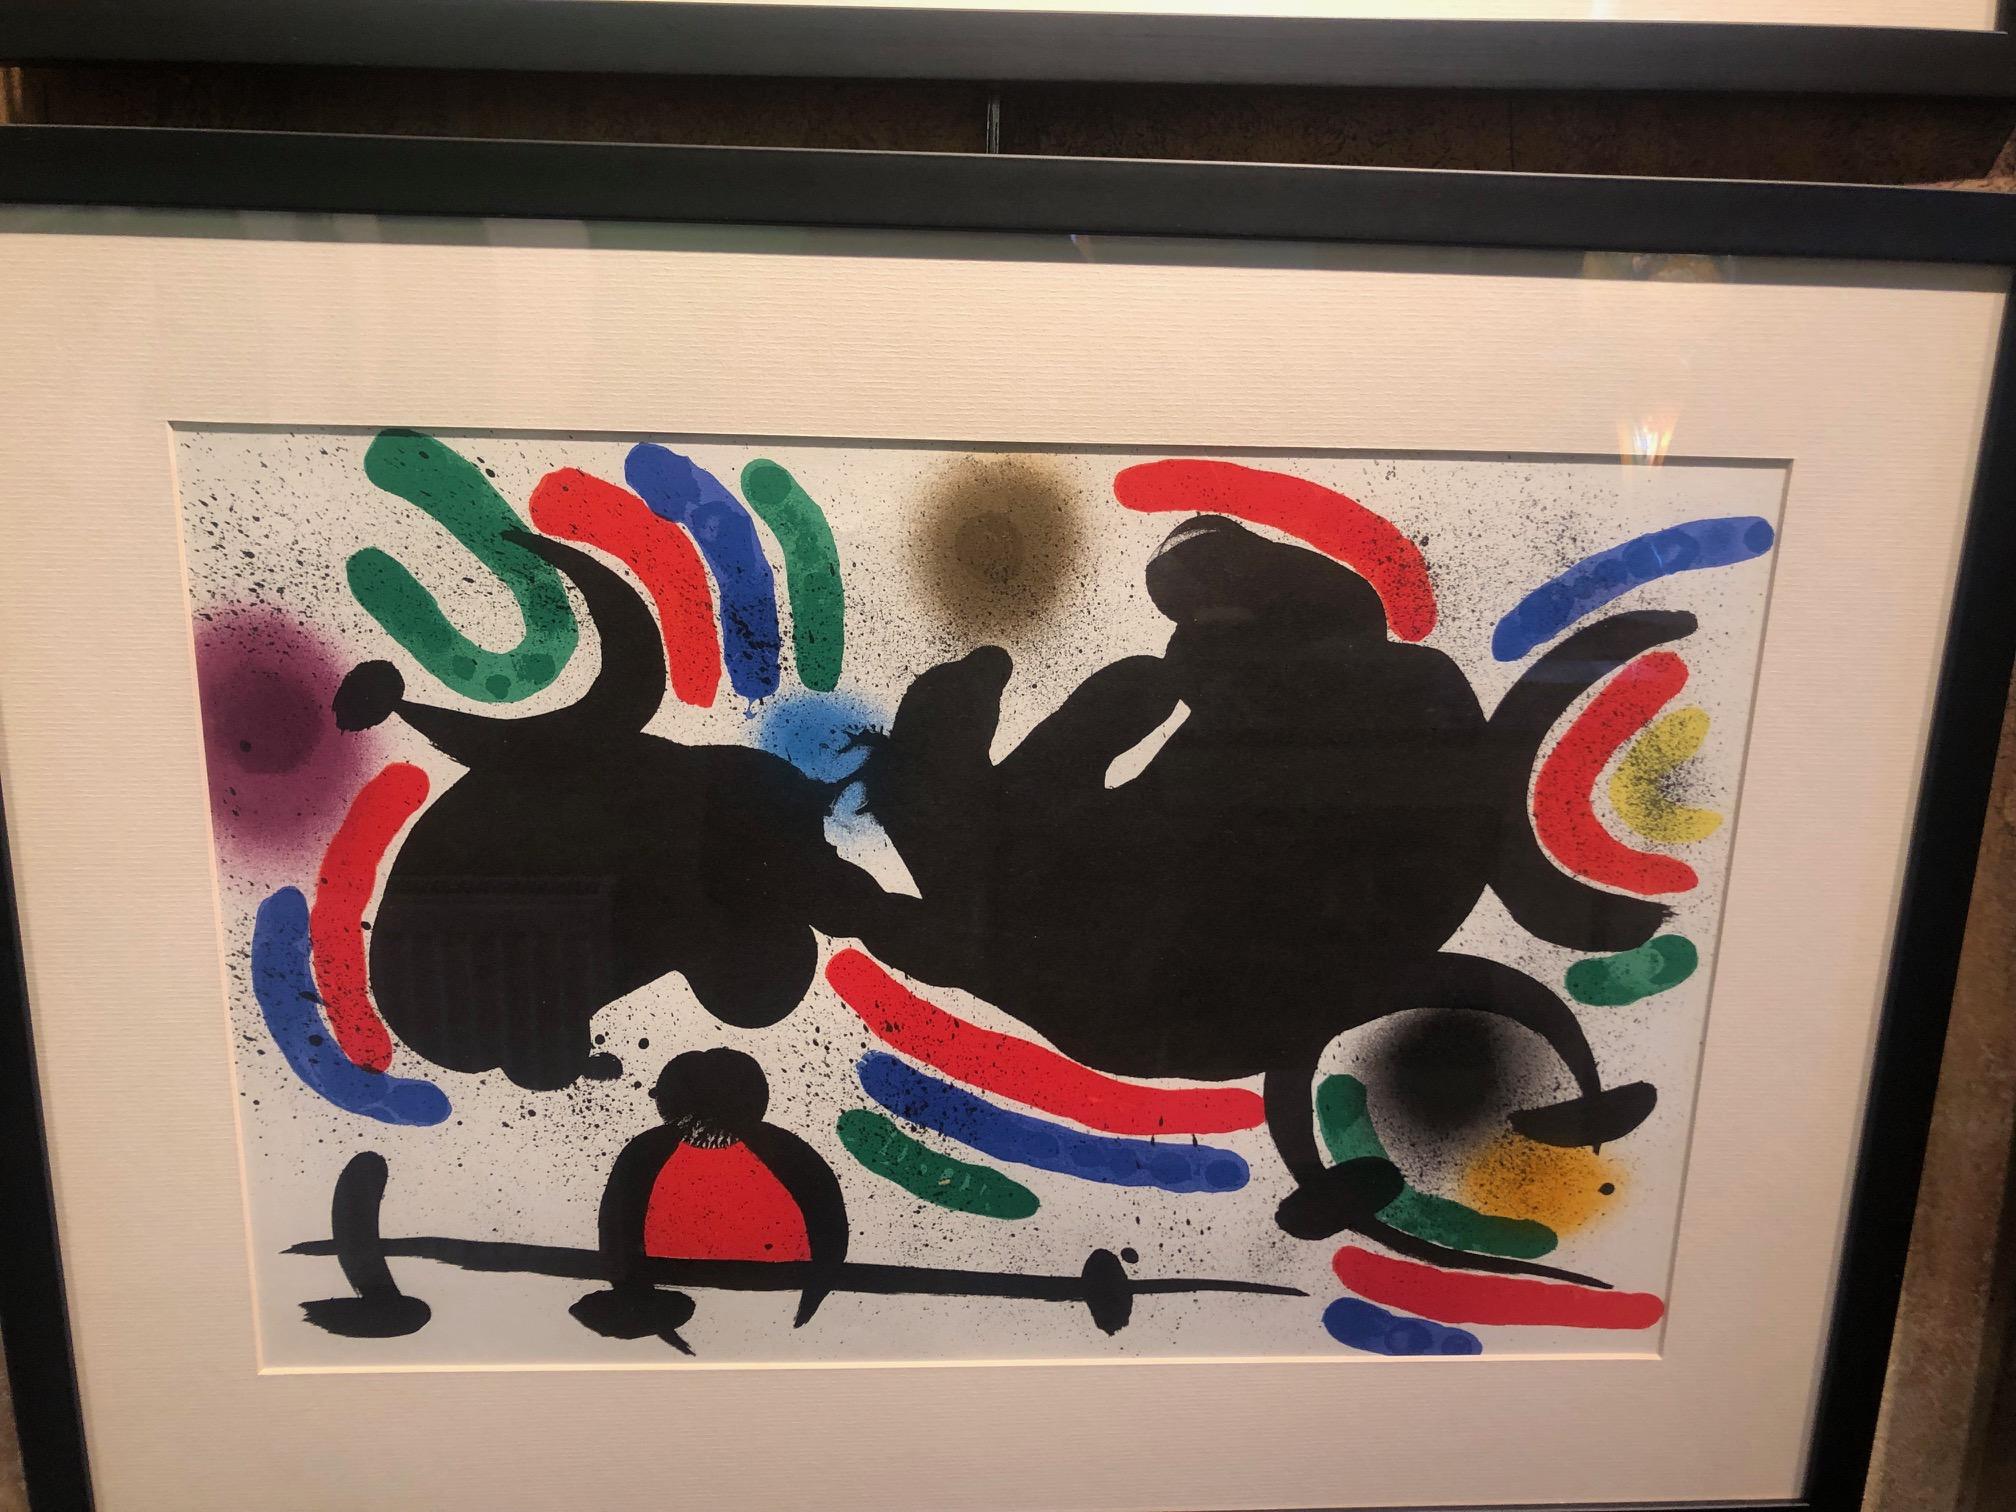 Untitled abstract and colourful limited edition lithograph by Miro - Art by Joan Miró